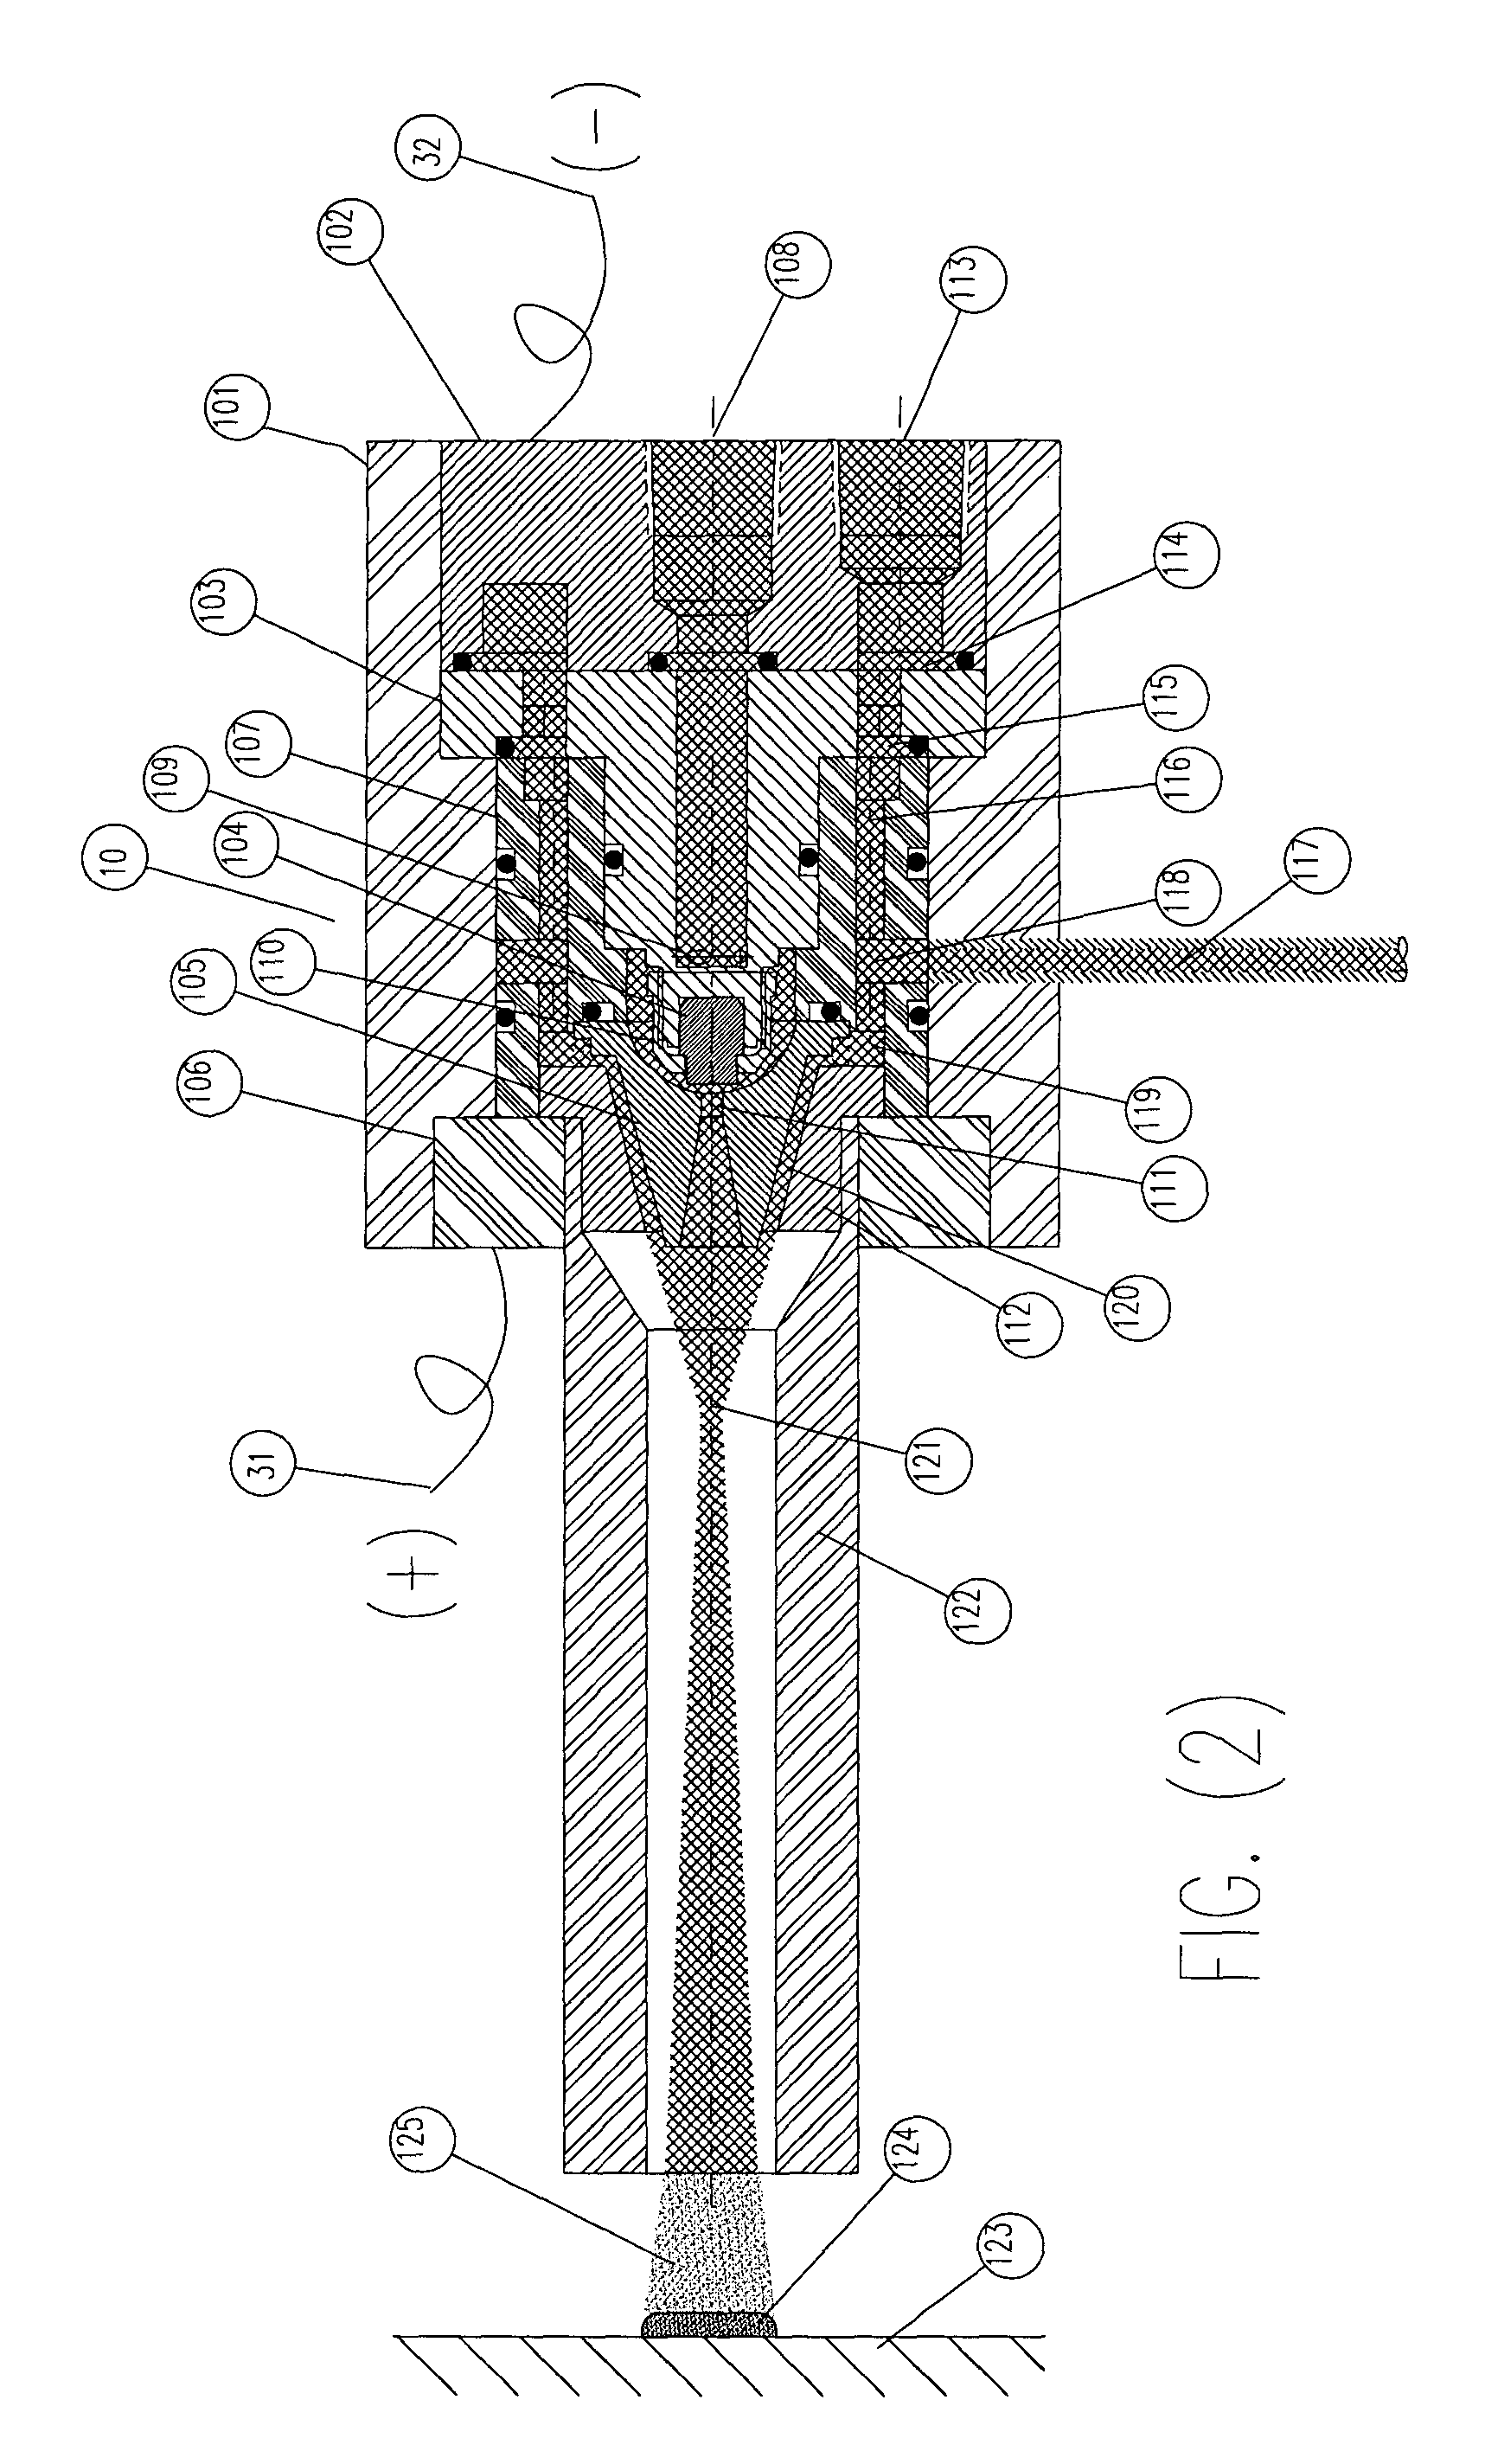 Rotary plasma spray method and apparatus for applying a coating utilizing particle kinetics